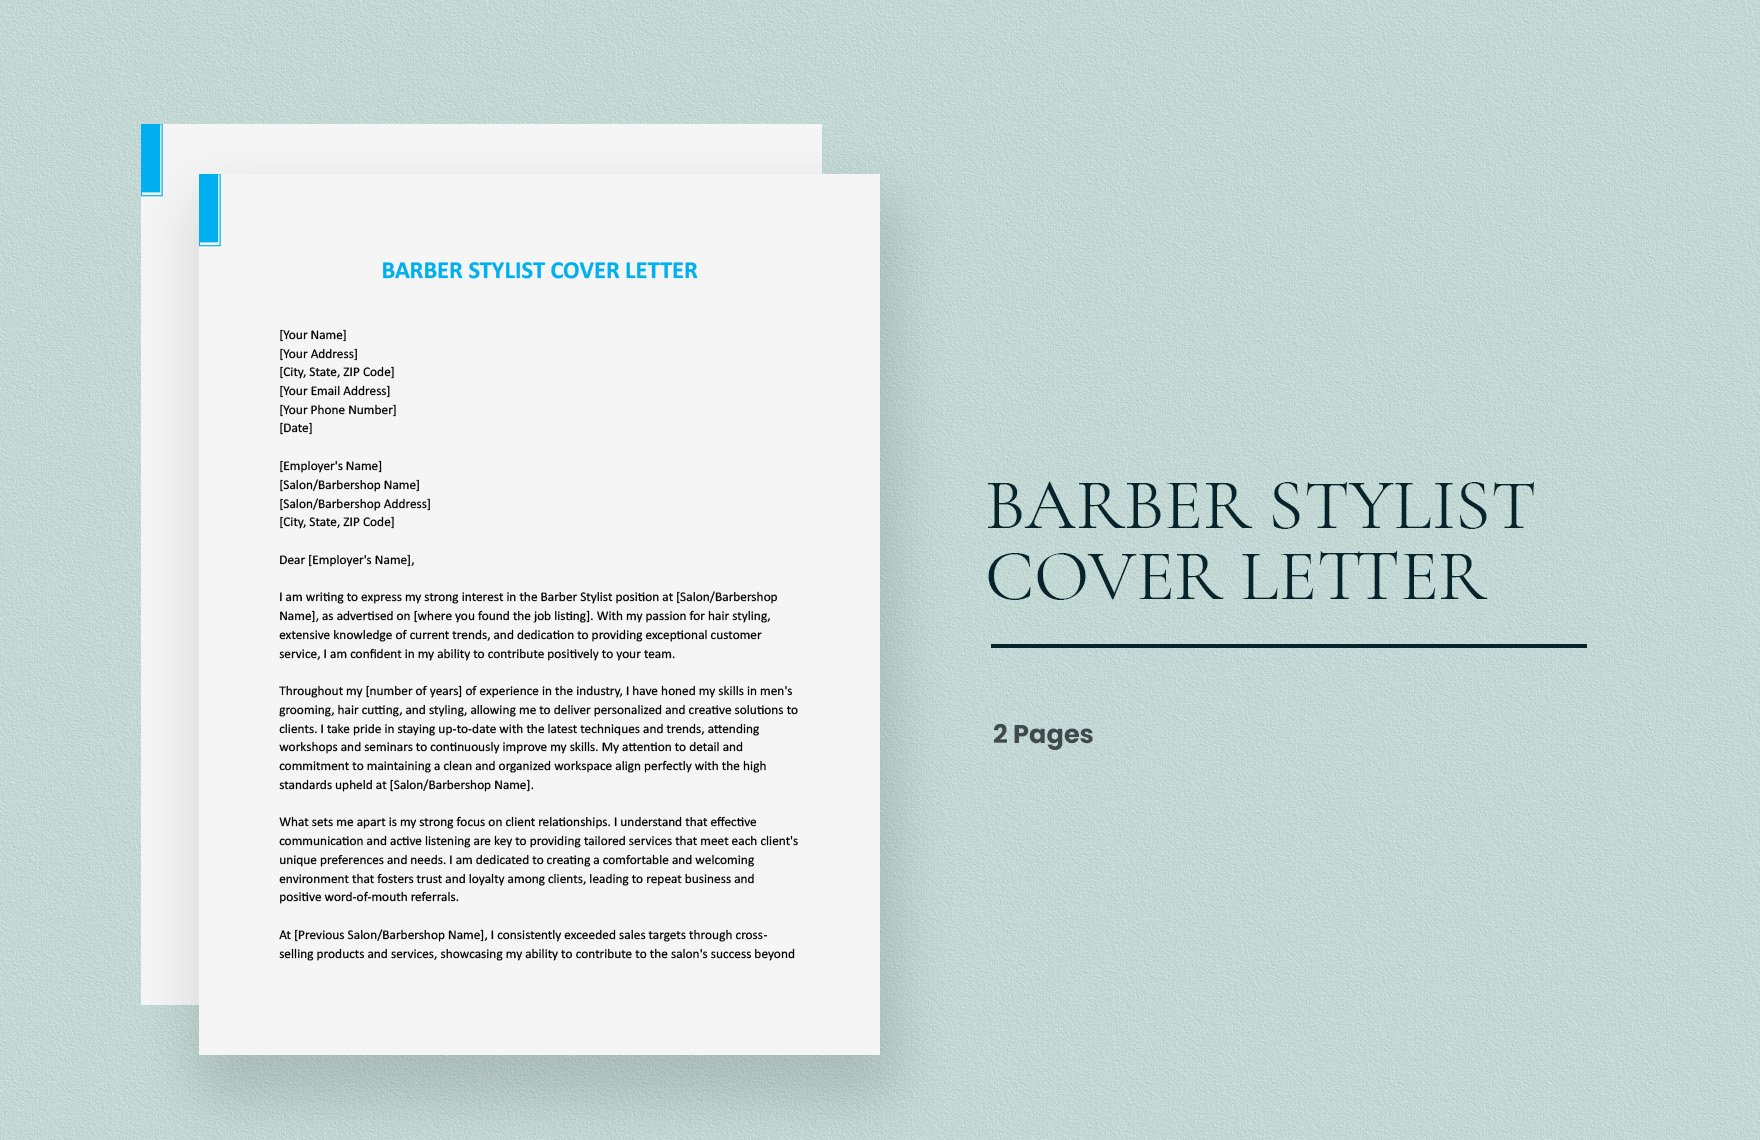 Barber Stylist Cover Letter in Word, Google Docs